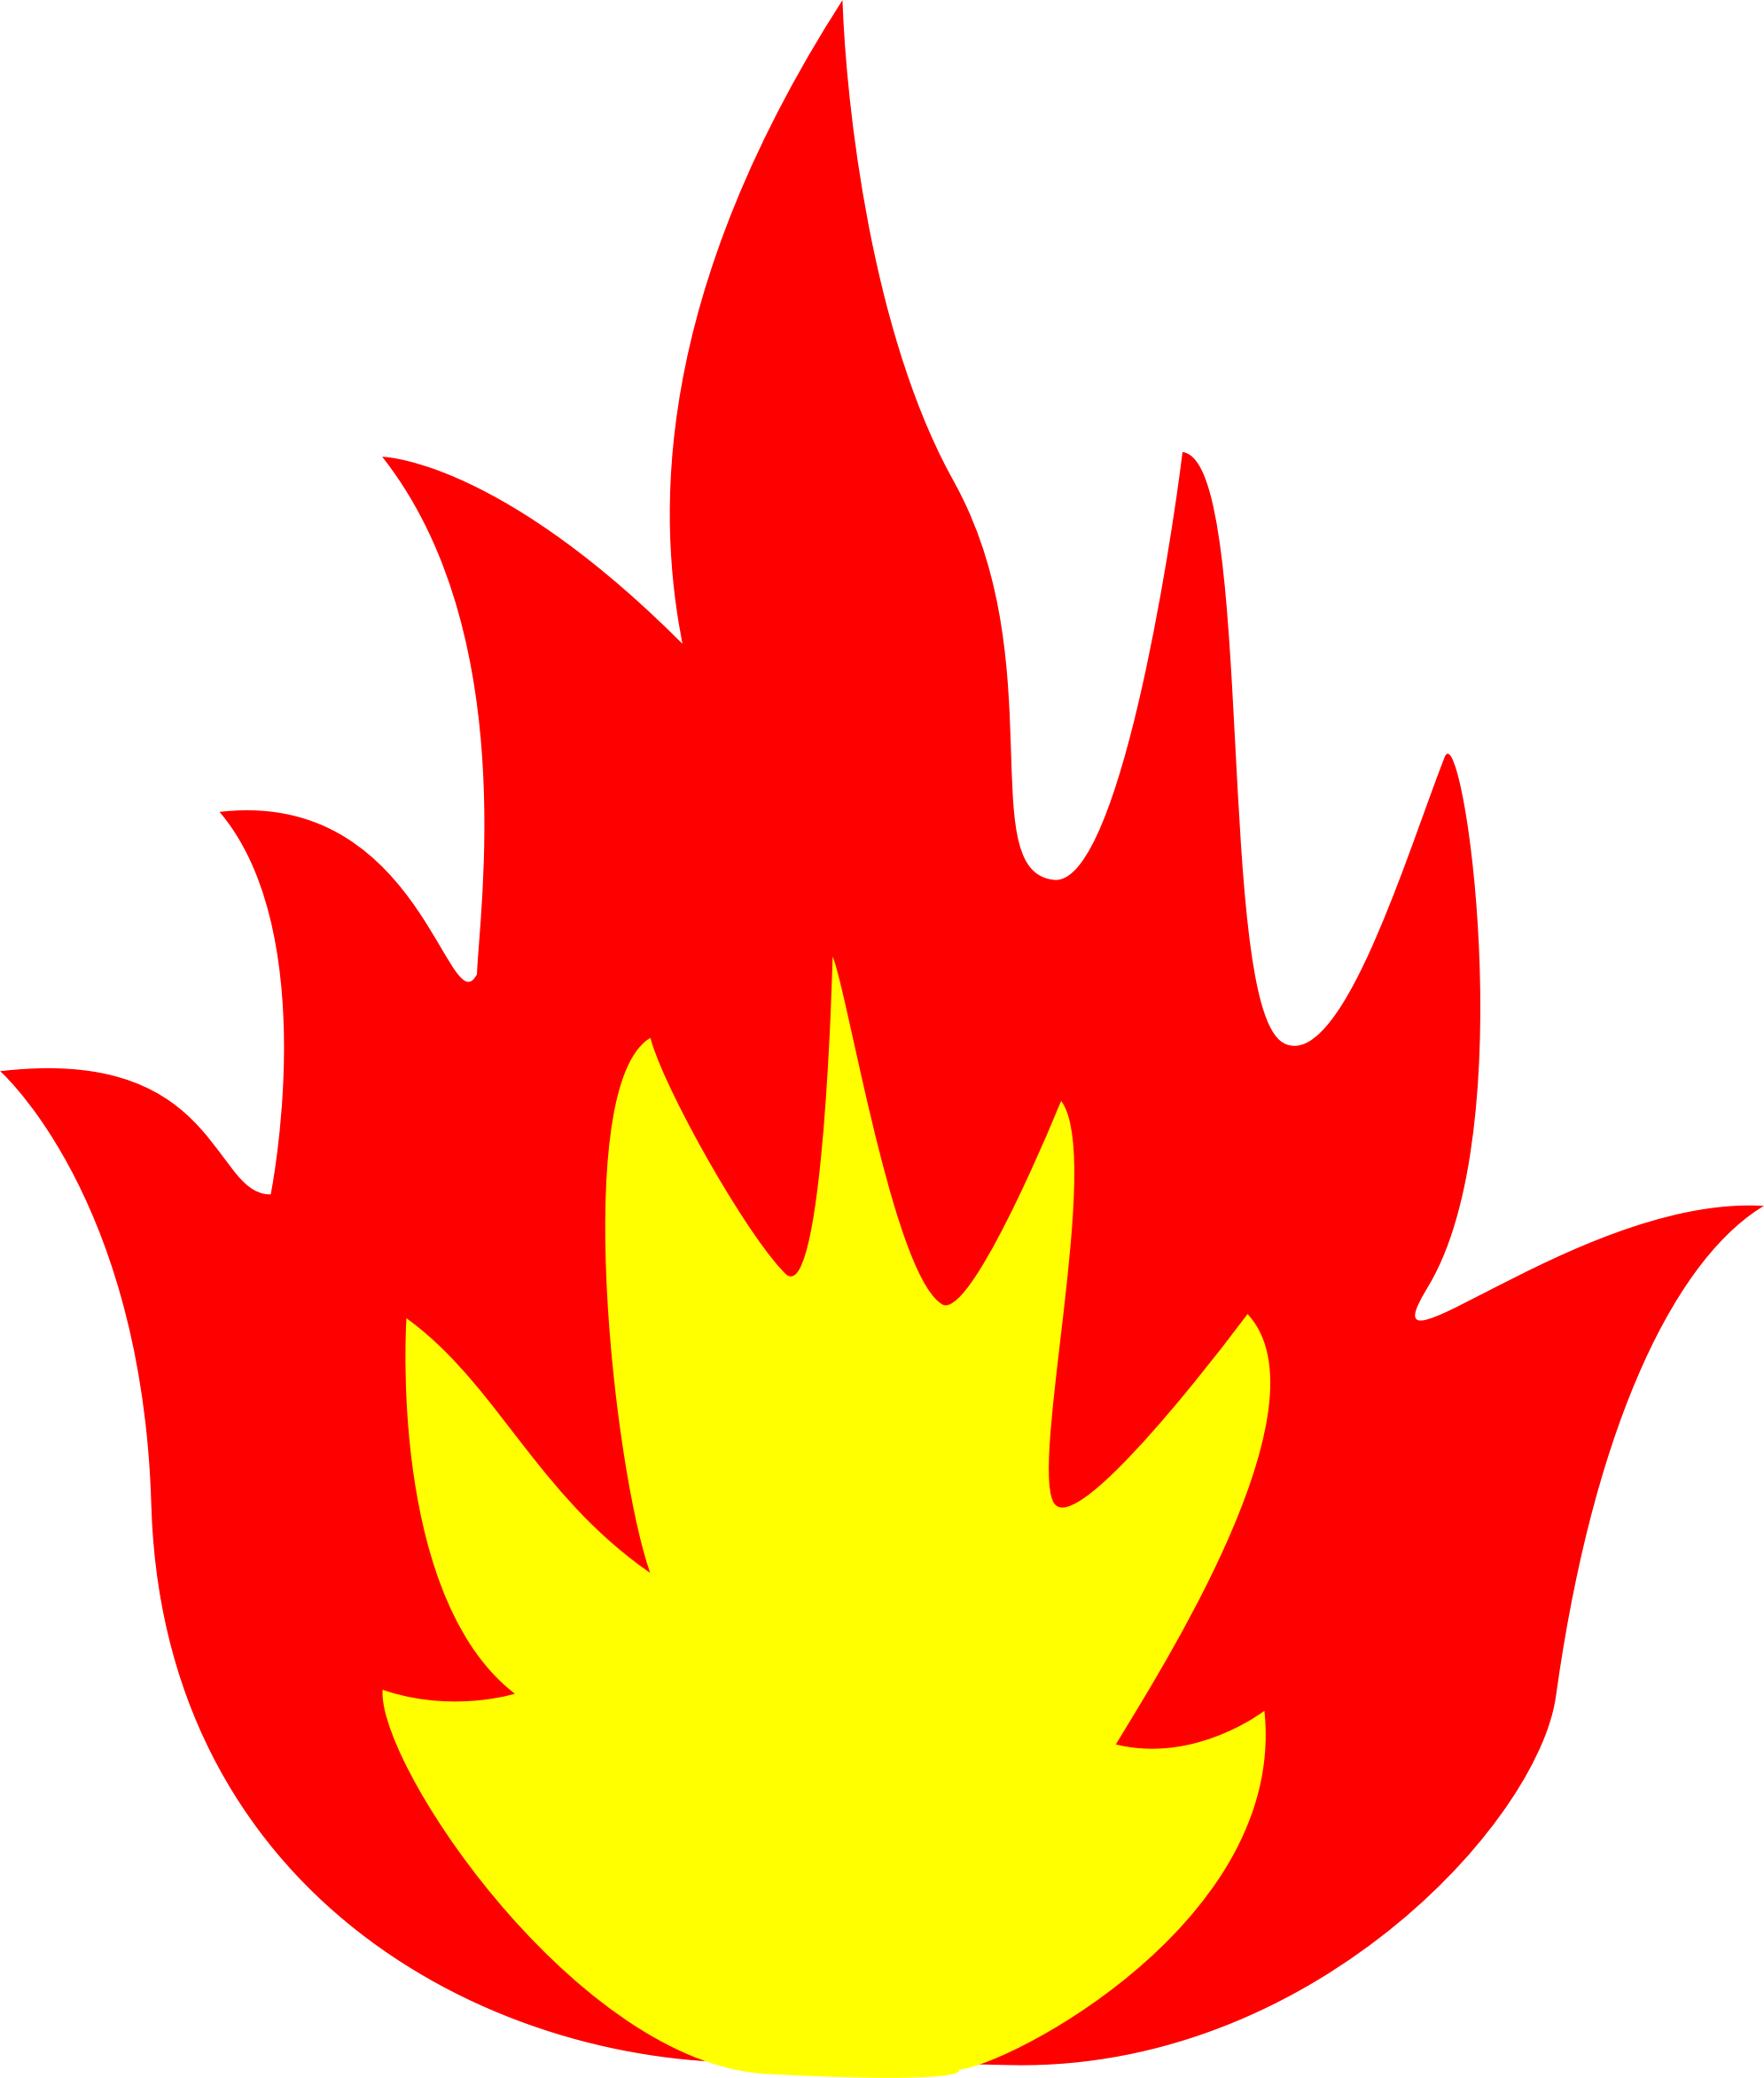 Flames clipart fire. Flame big image png